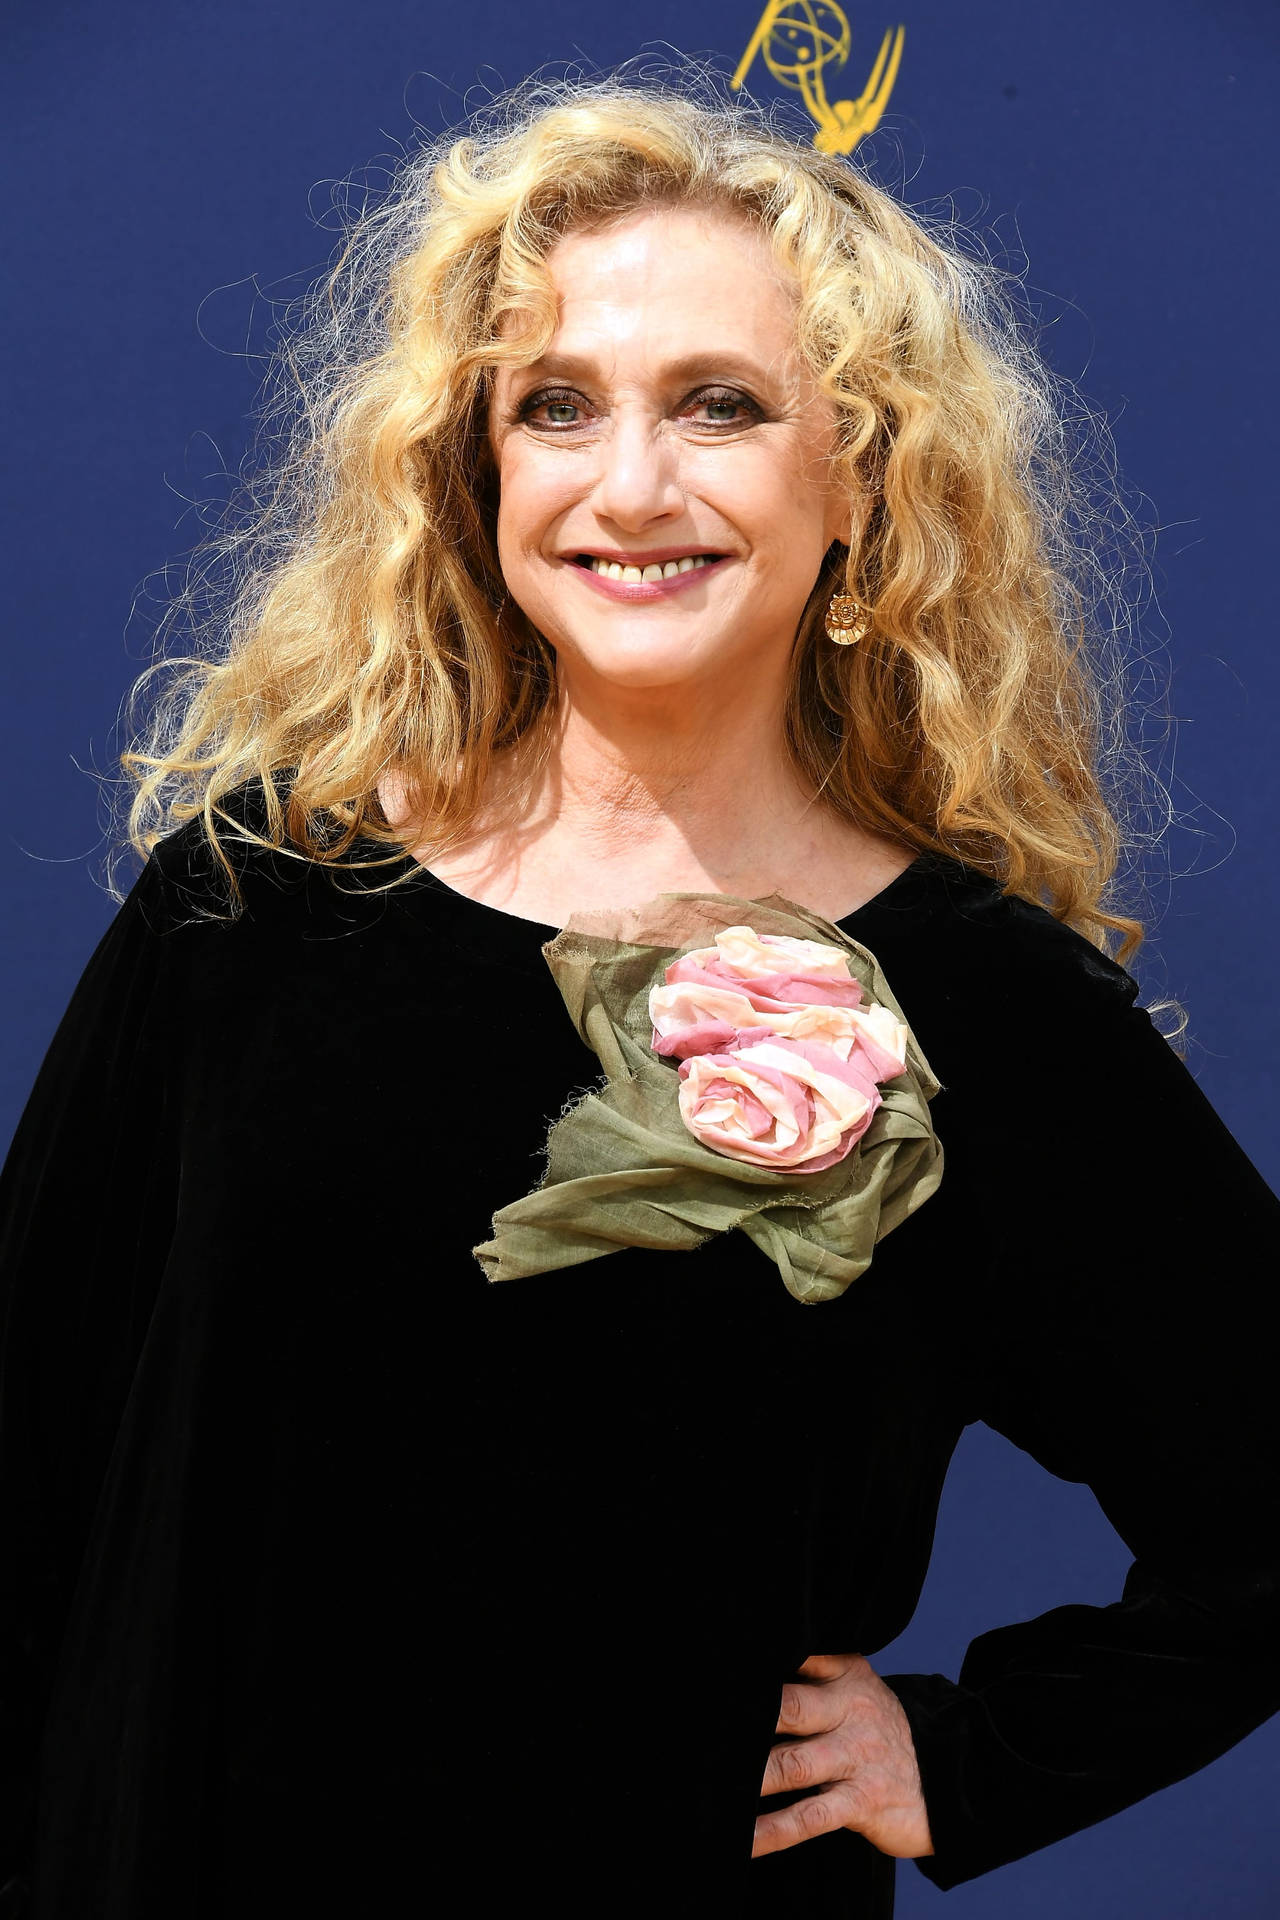 Carolkane Svart Blus (this Is Not Related To Computer Or Mobile Wallpaper) Wallpaper